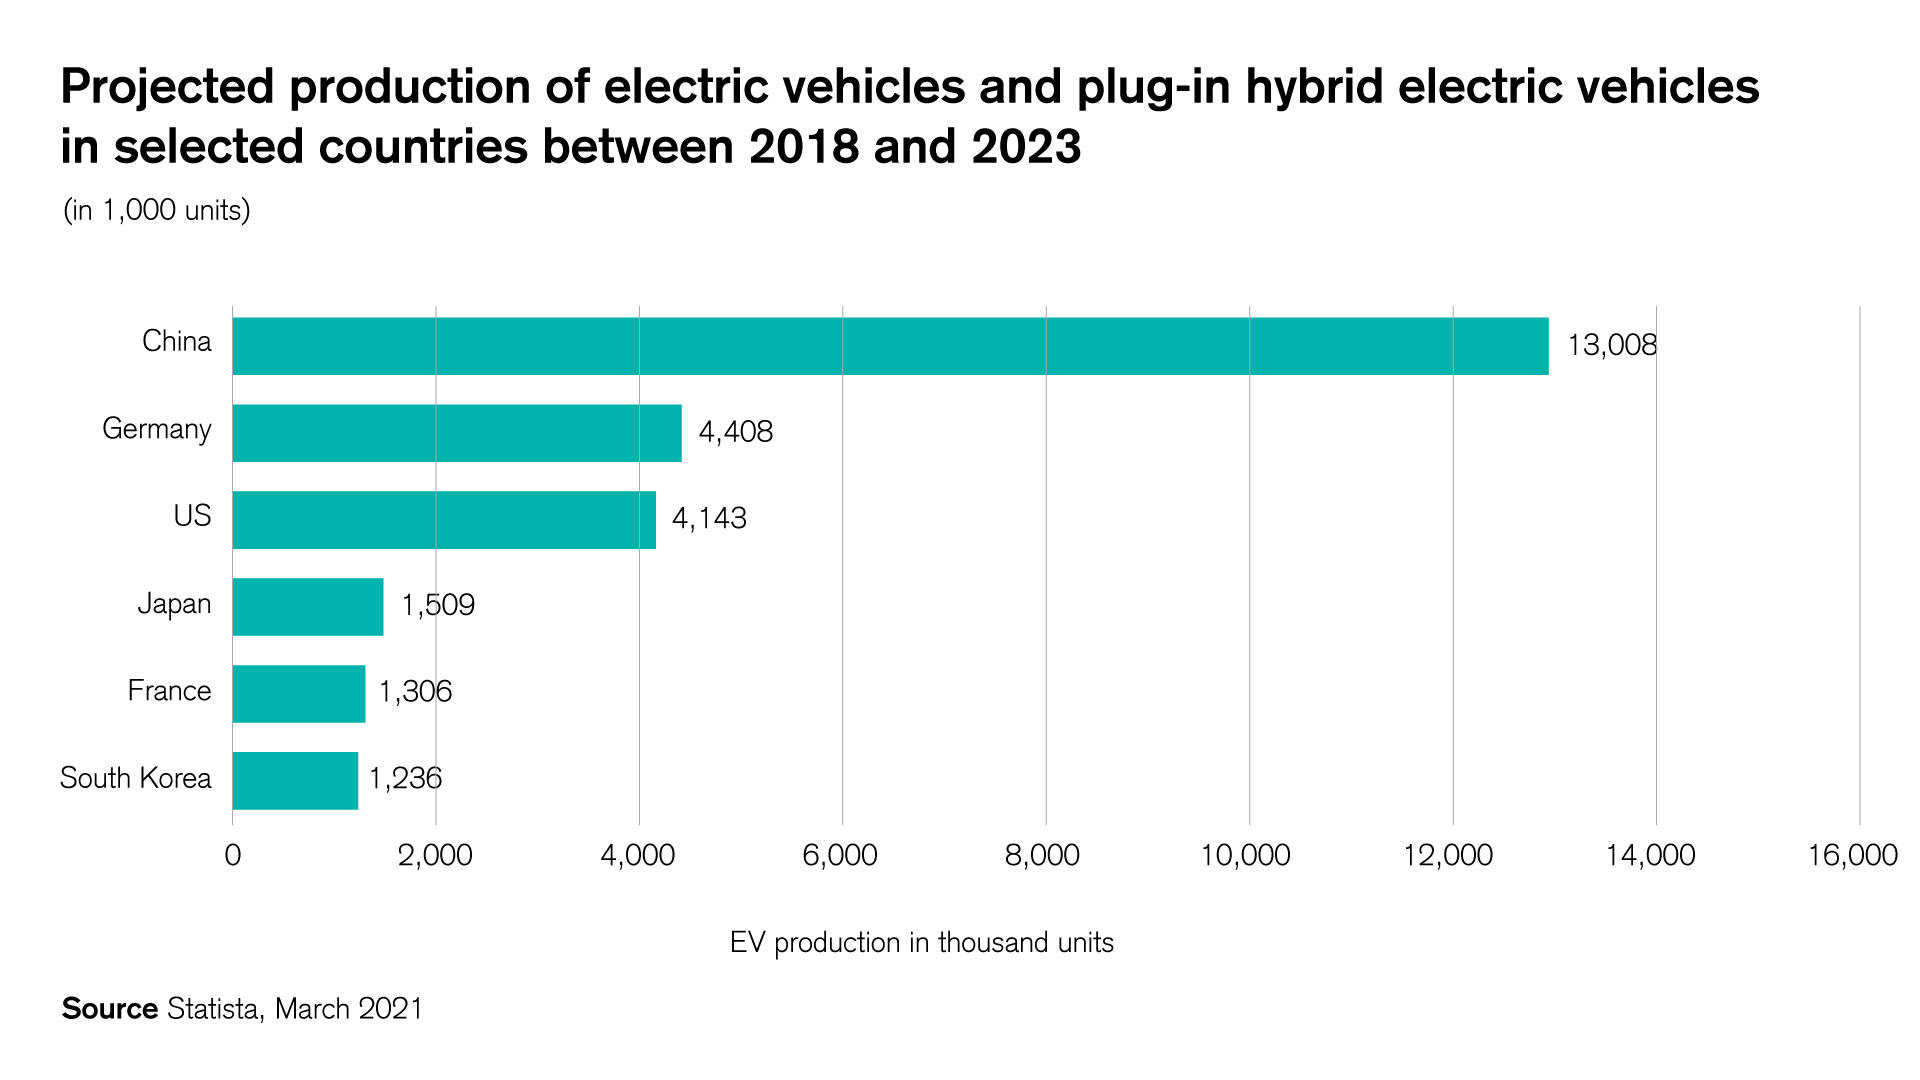 Projected production of electric vehicles and plug-in hybrid electric vehicles in selected countries between 2018 and 2023